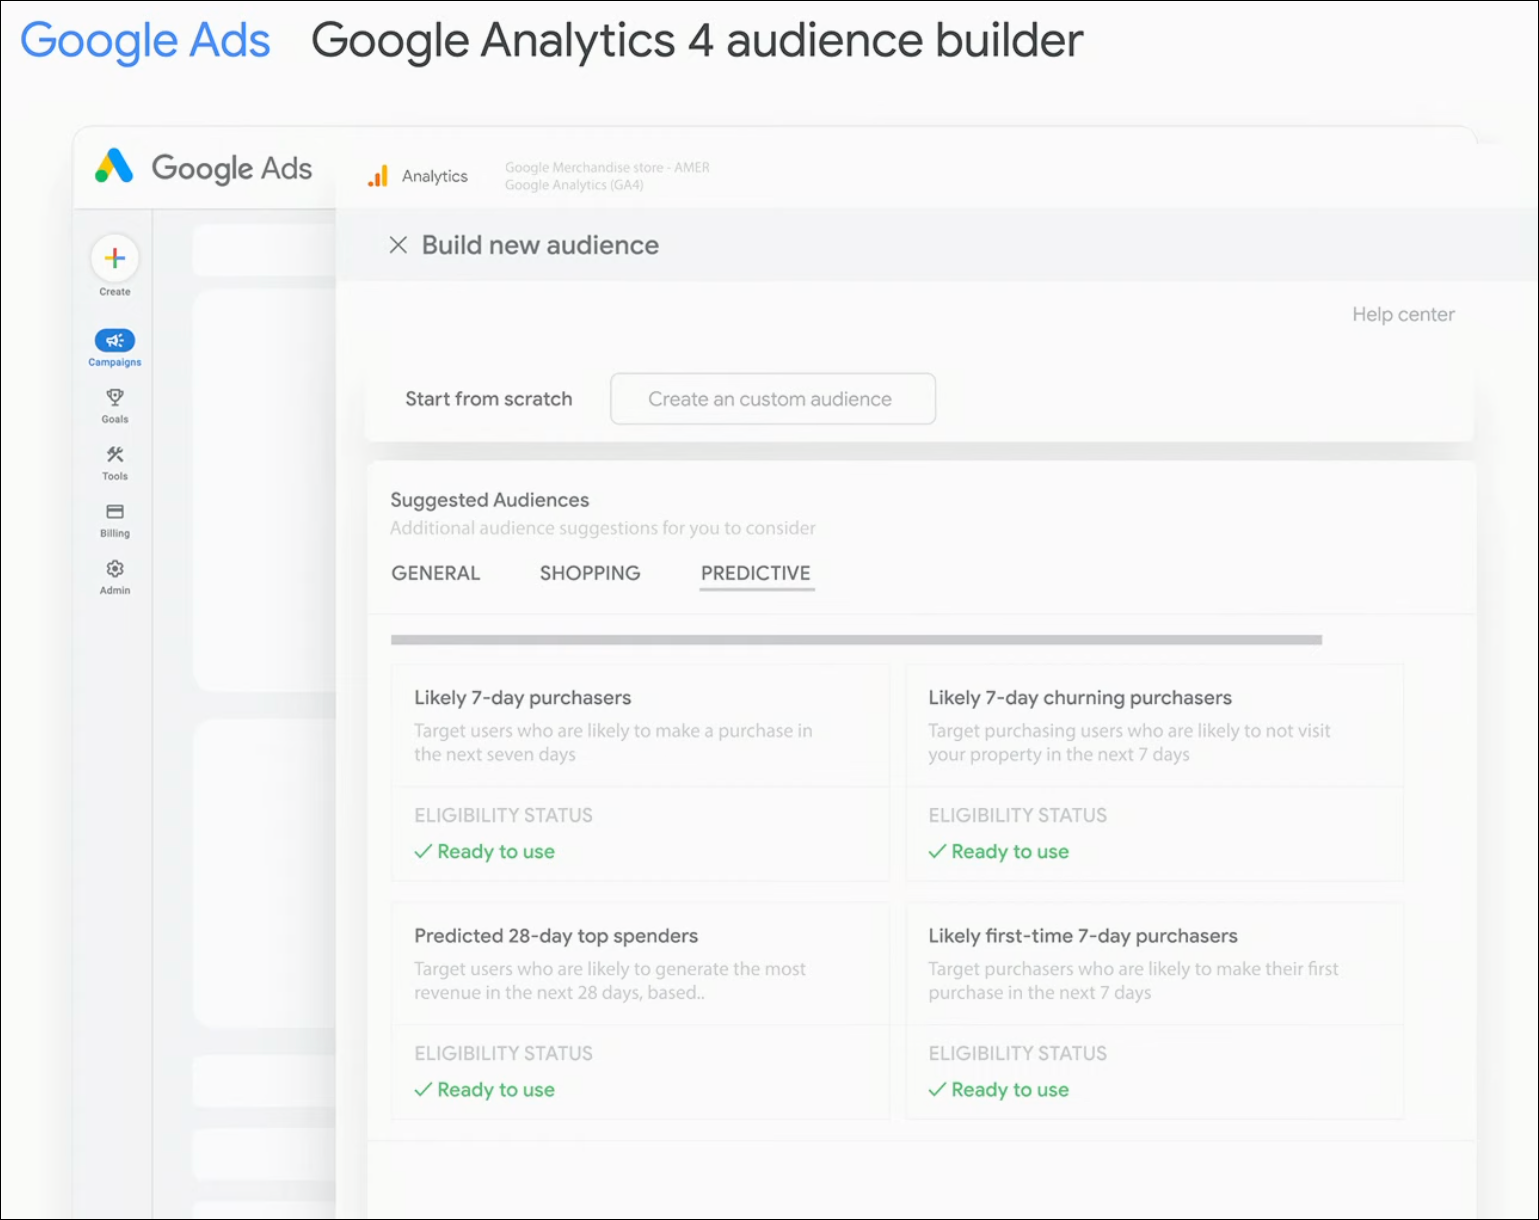 GA4 will replace universal analytics and become the new standard for data collection on Google. Advertisers can use cross-platform data to build predictive audiences for use in Google Ads.